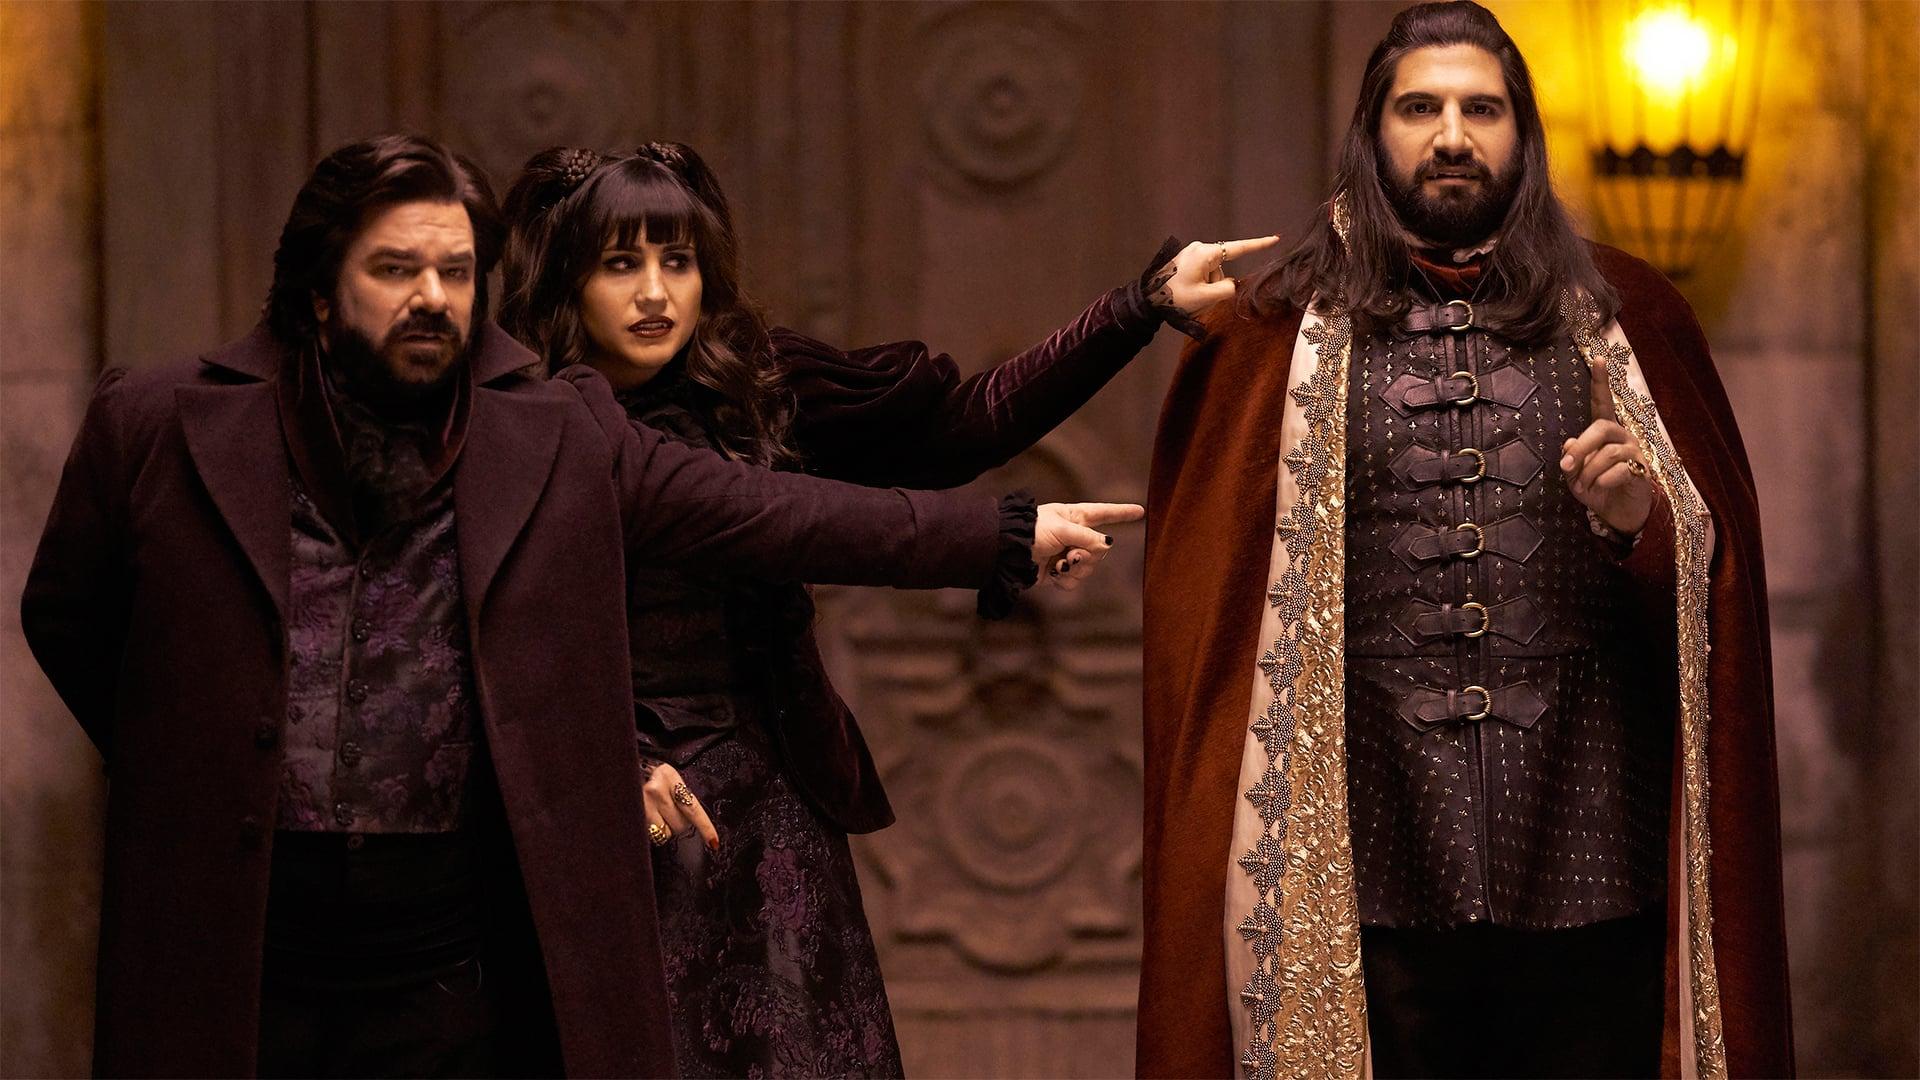 What We Do In The Shadows Season 2 